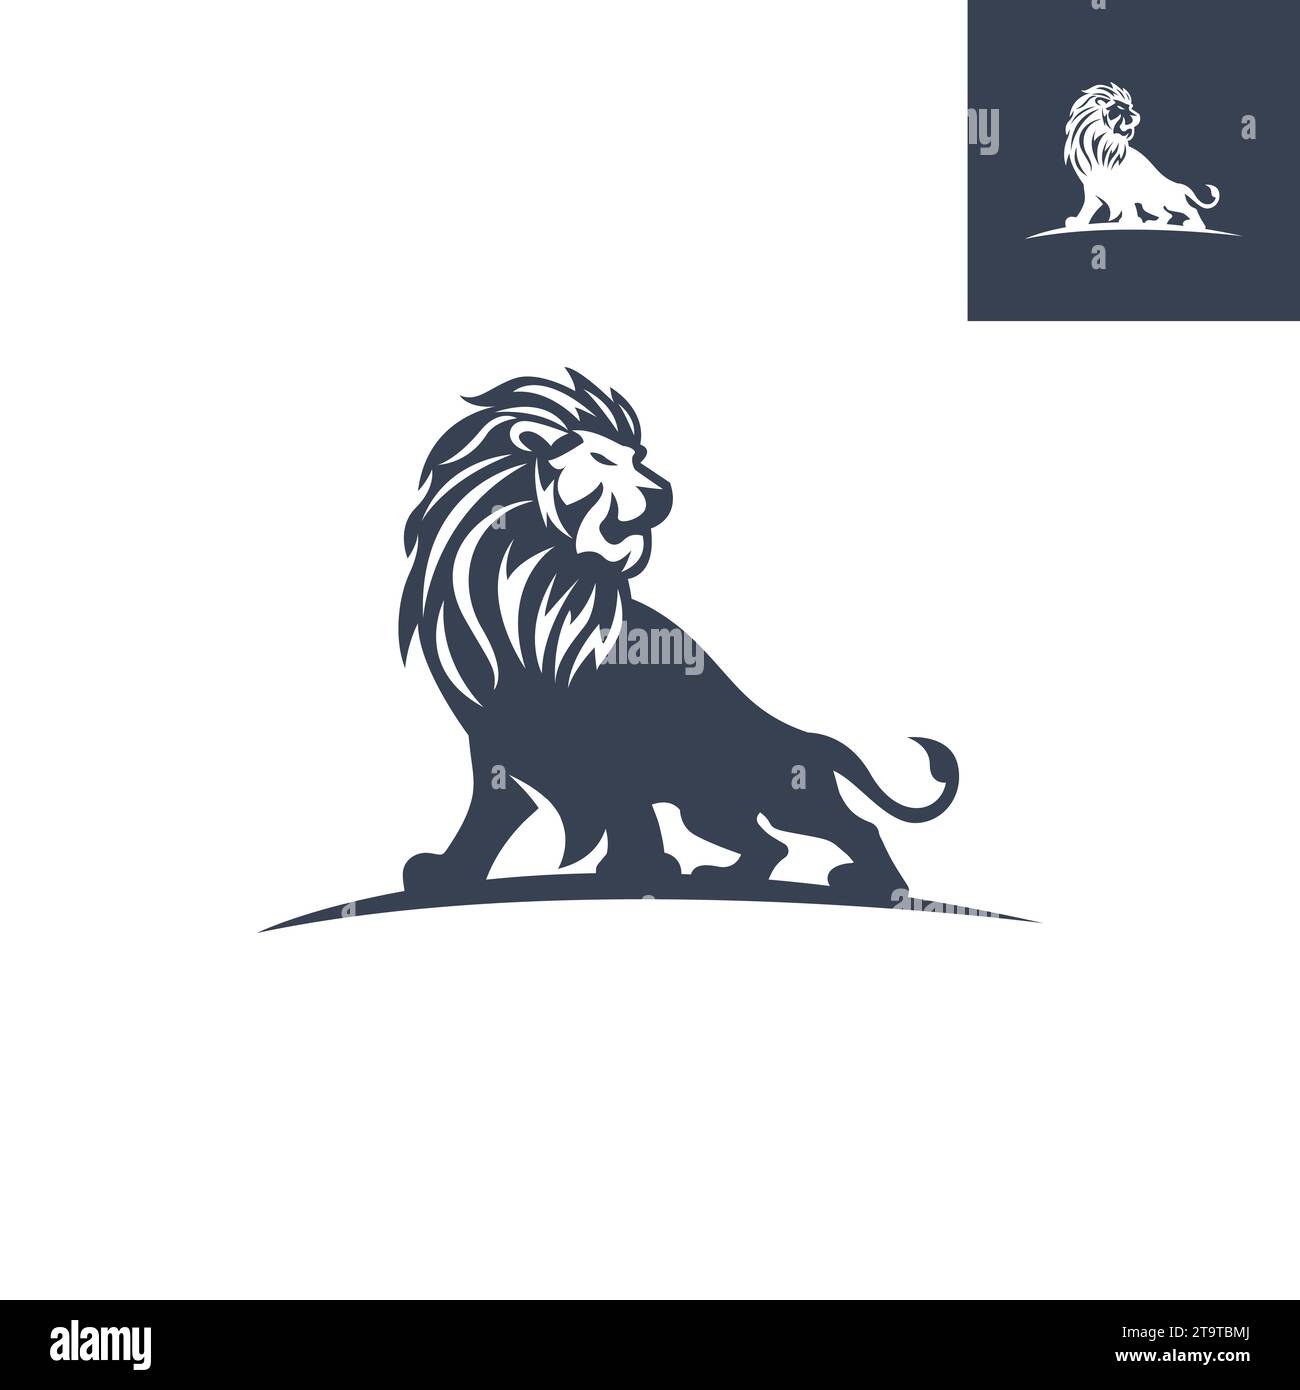 Lion logo lion icon company logo design strength and power symbol vector image in flat style Stock Vector